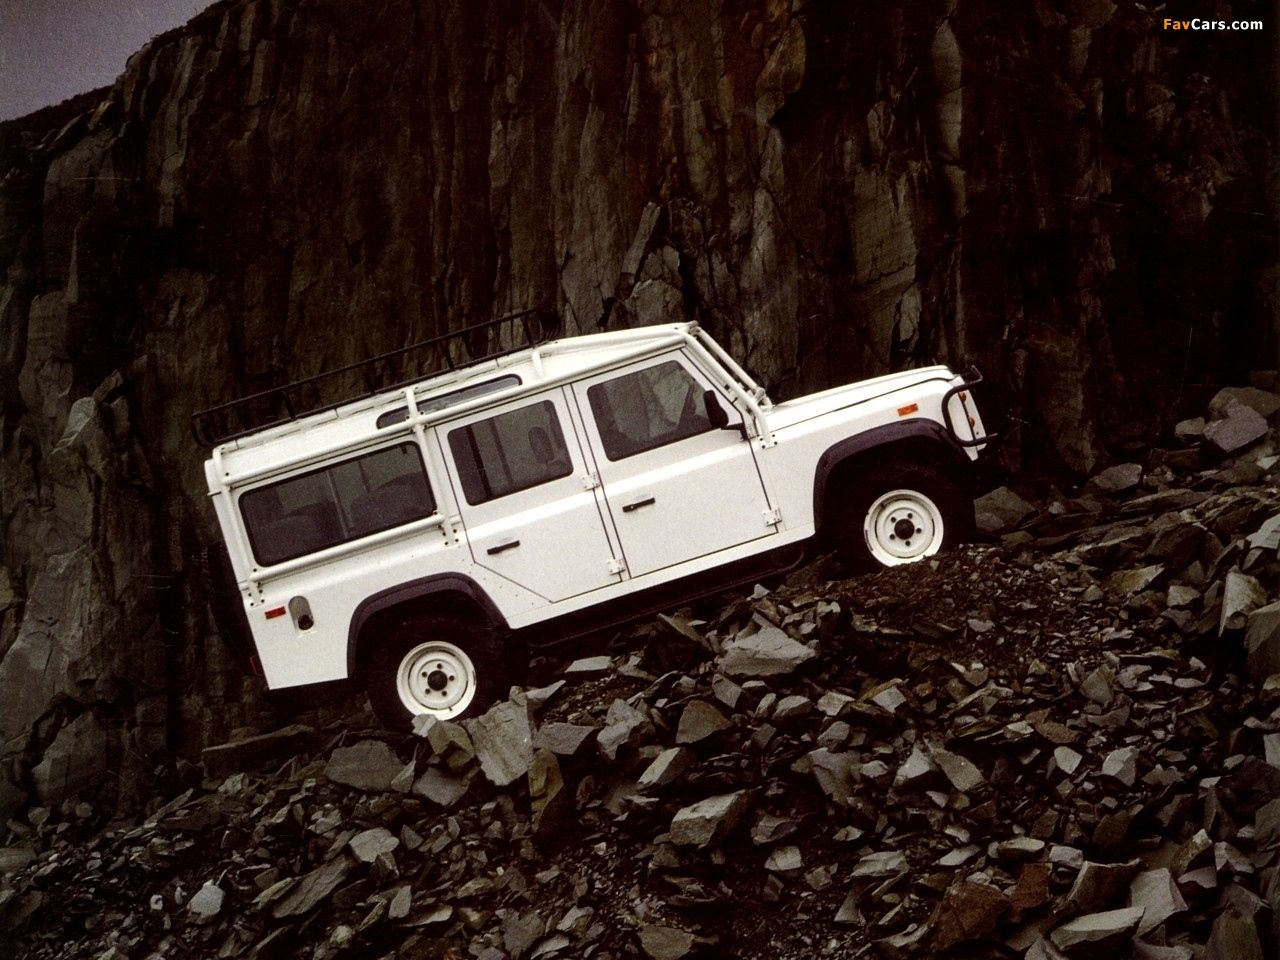 15 of the World's Most Capable Adventure Vehicles